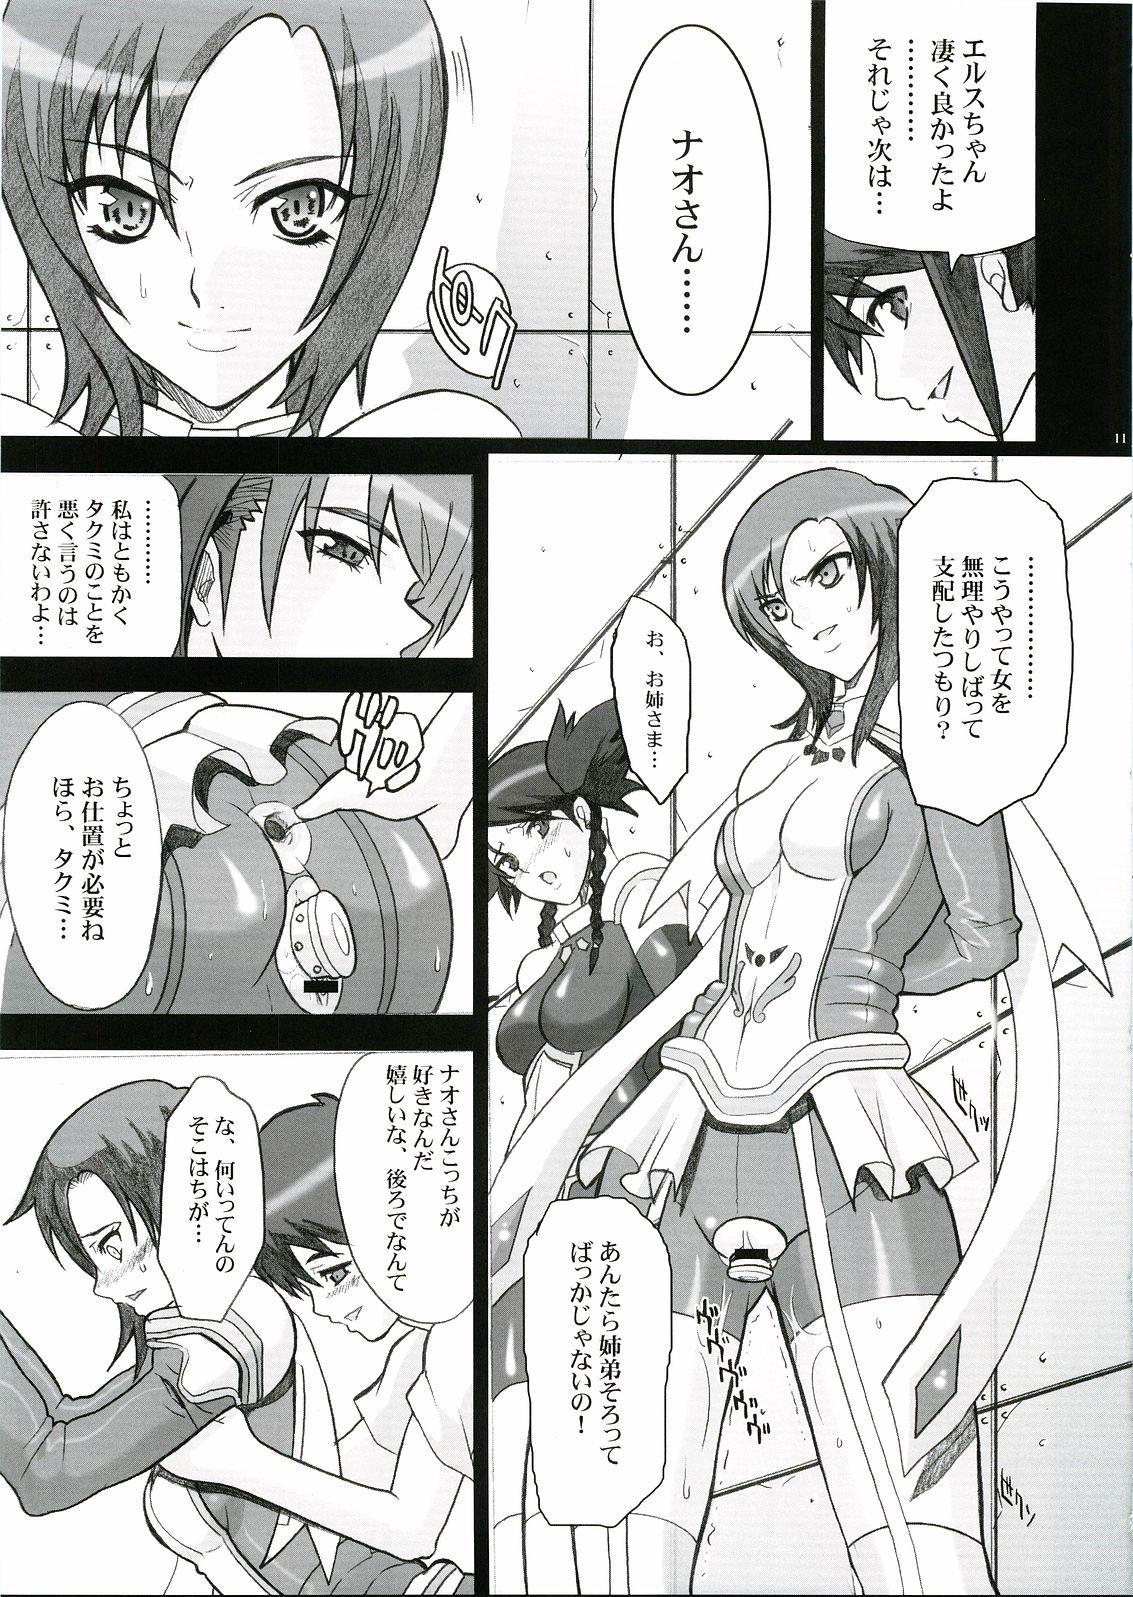 Dominant IMPERIAL DAYS - Mai otome Climax - Page 8